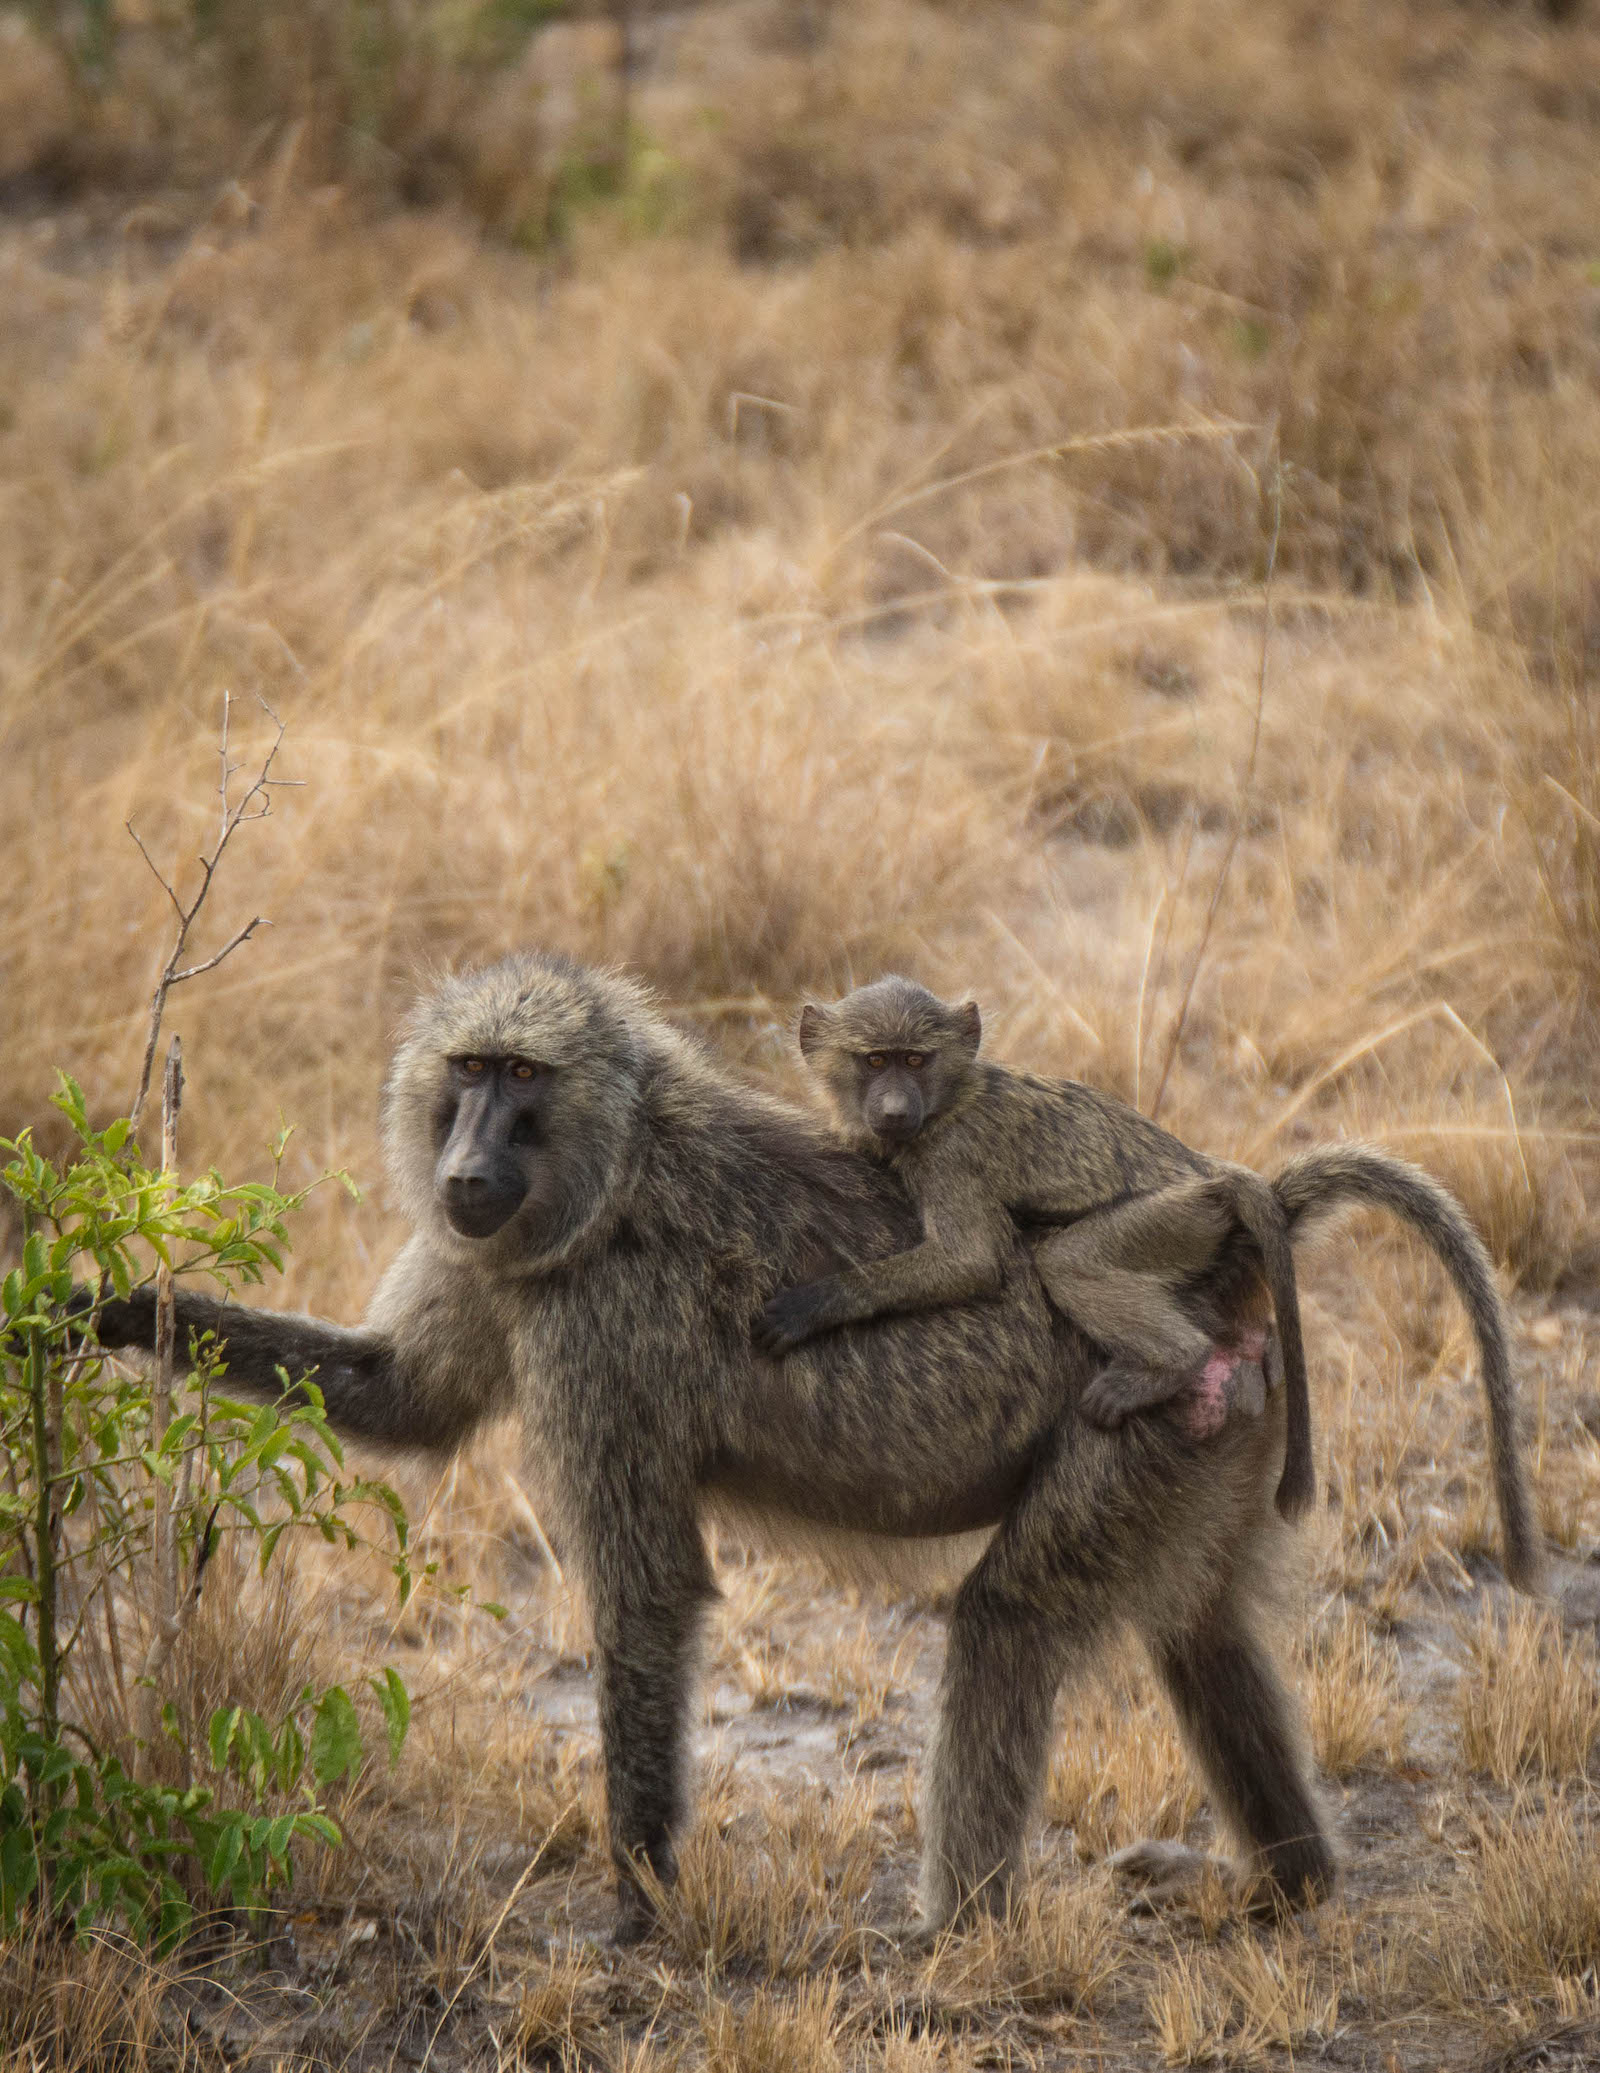 Olive baboons are prevalent on the savannah and are also known to cohabit with chimpanzees in places like Nyungwe Forest in Rwanda